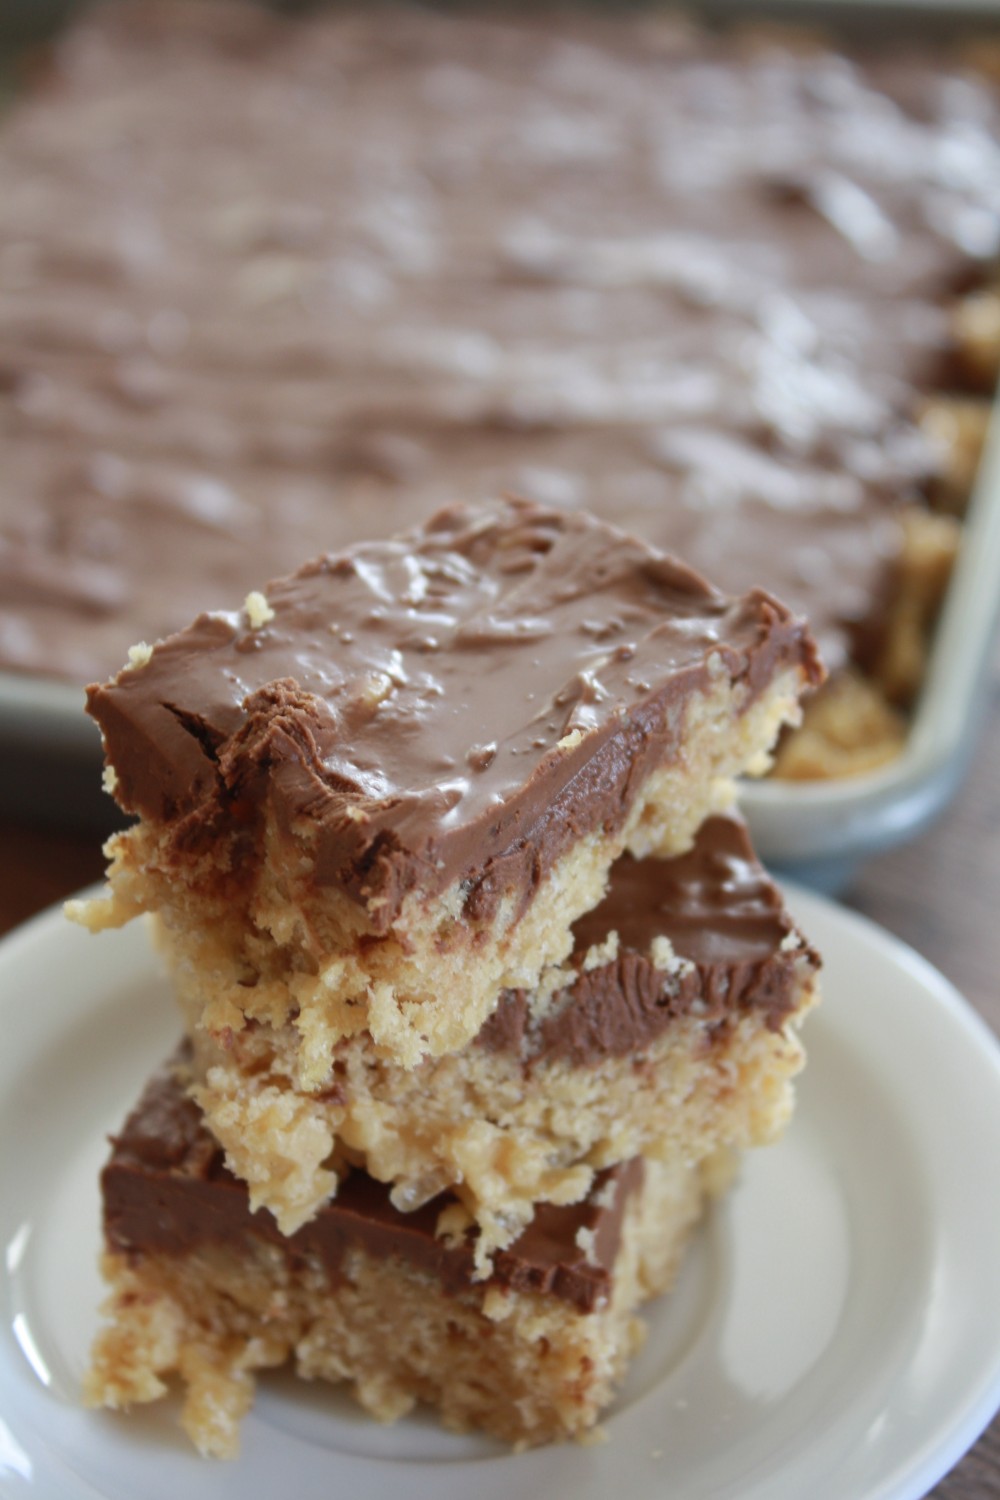 Scotch-A-Roos are the "Ultimate" Rice Krispie Treat! Double the recipe and use whole box of Rice Krispies and 1 full bag of each butterscotch and milk chocolate chips. Use a jelly roll pan or larger. These are so good and such an easy dessert!